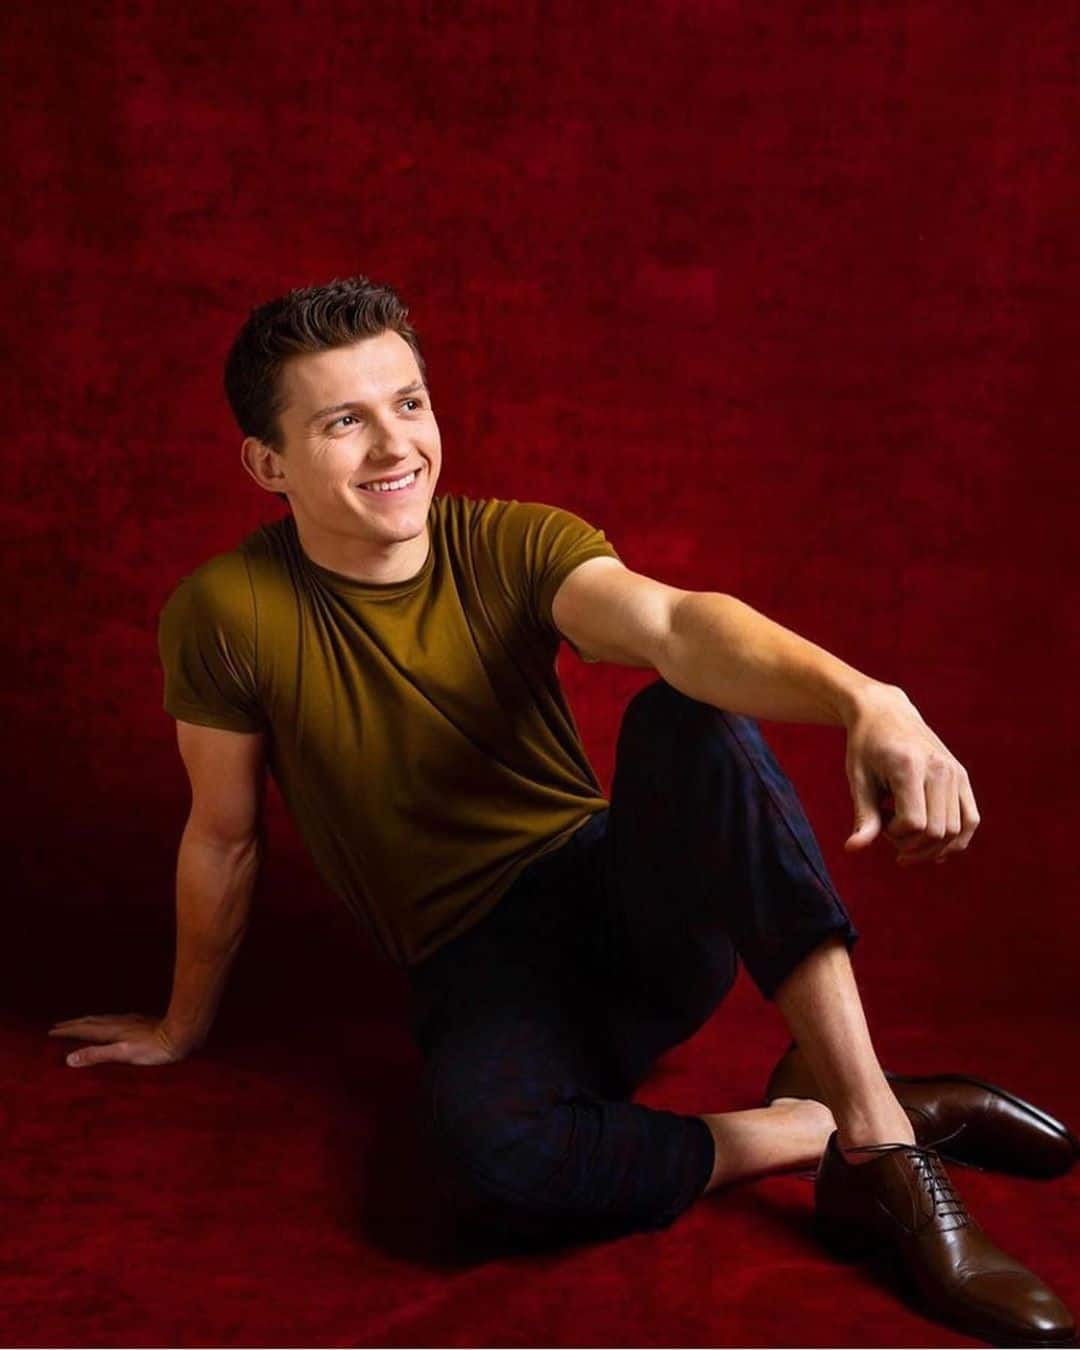 Tom Holland Net Worth In 2022, Birthday, Height, Girlfriend And Movies